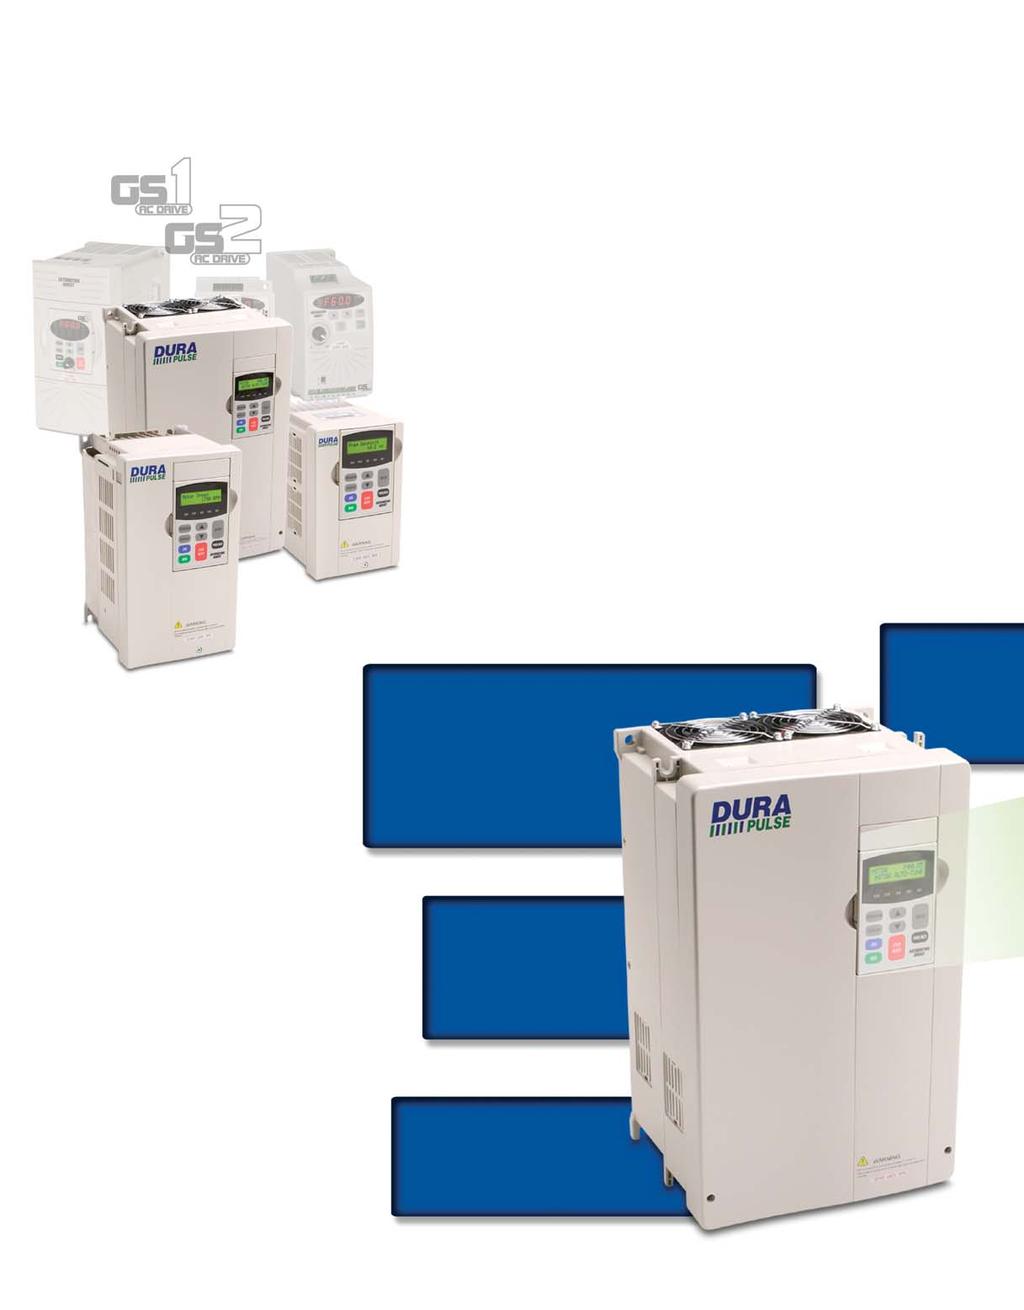 DURAPULSE AC Drives DURAPULSE builds on the GS series The DURAPULSE series builds on the simplicity and flexibility of the GS1 and GS2 series, incorporating feedback from our customers and extensive